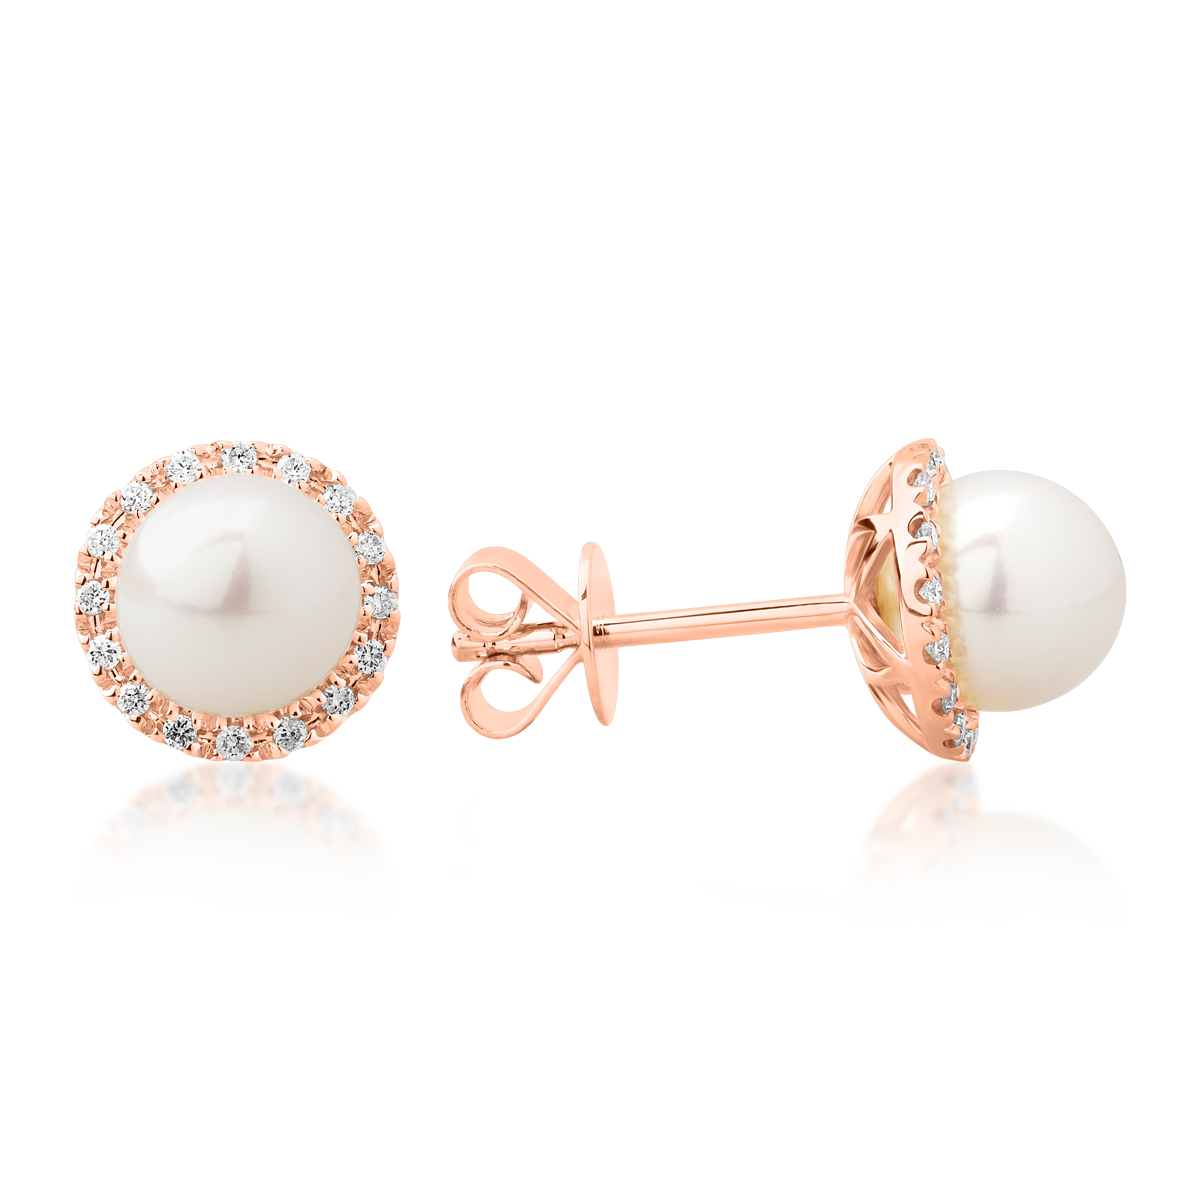 Rose gold earrings with 0.093ct diamonds and fresh water pearls